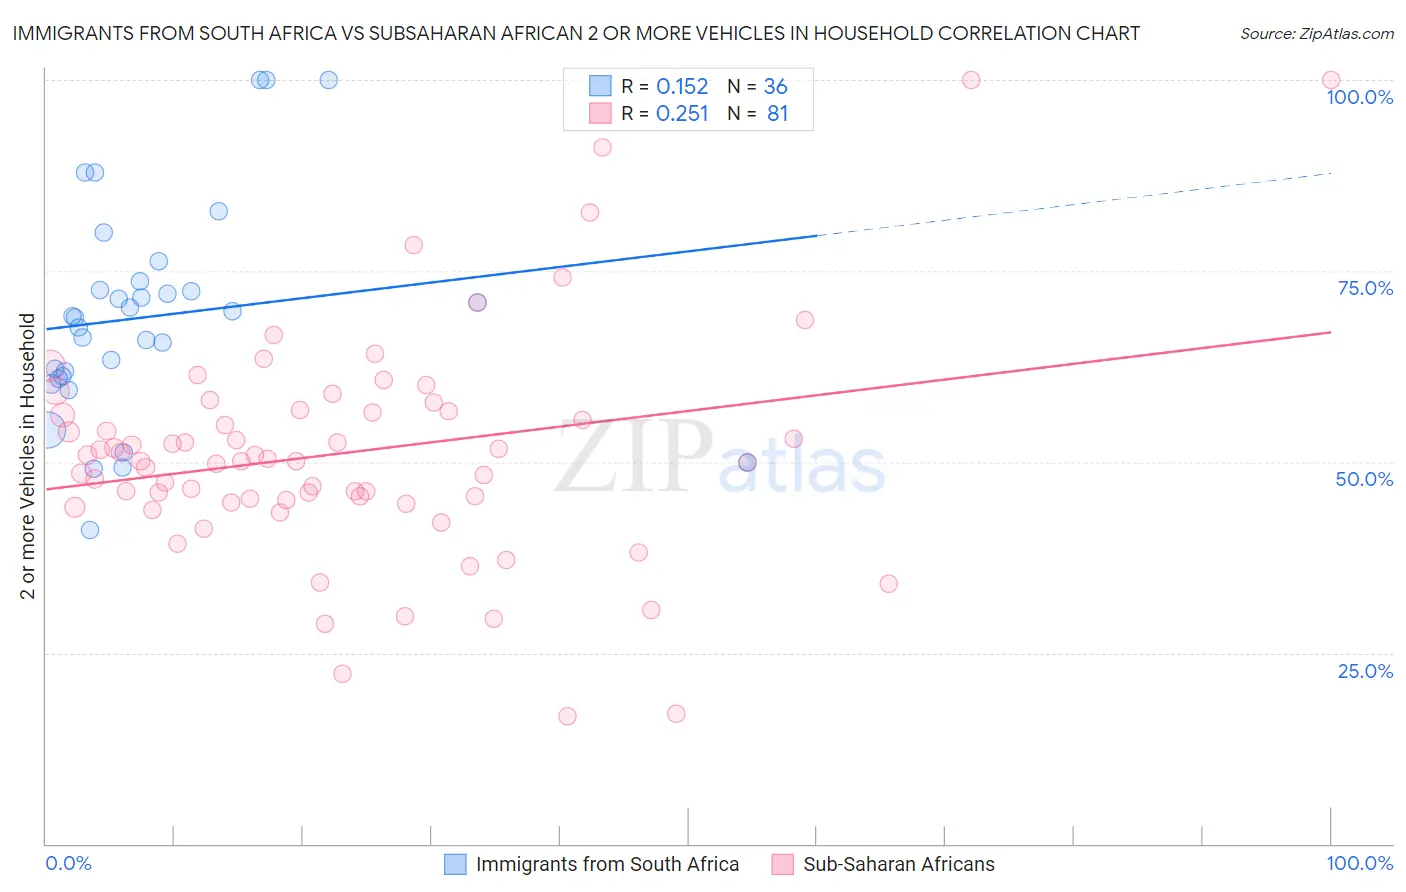 Immigrants from South Africa vs Subsaharan African 2 or more Vehicles in Household